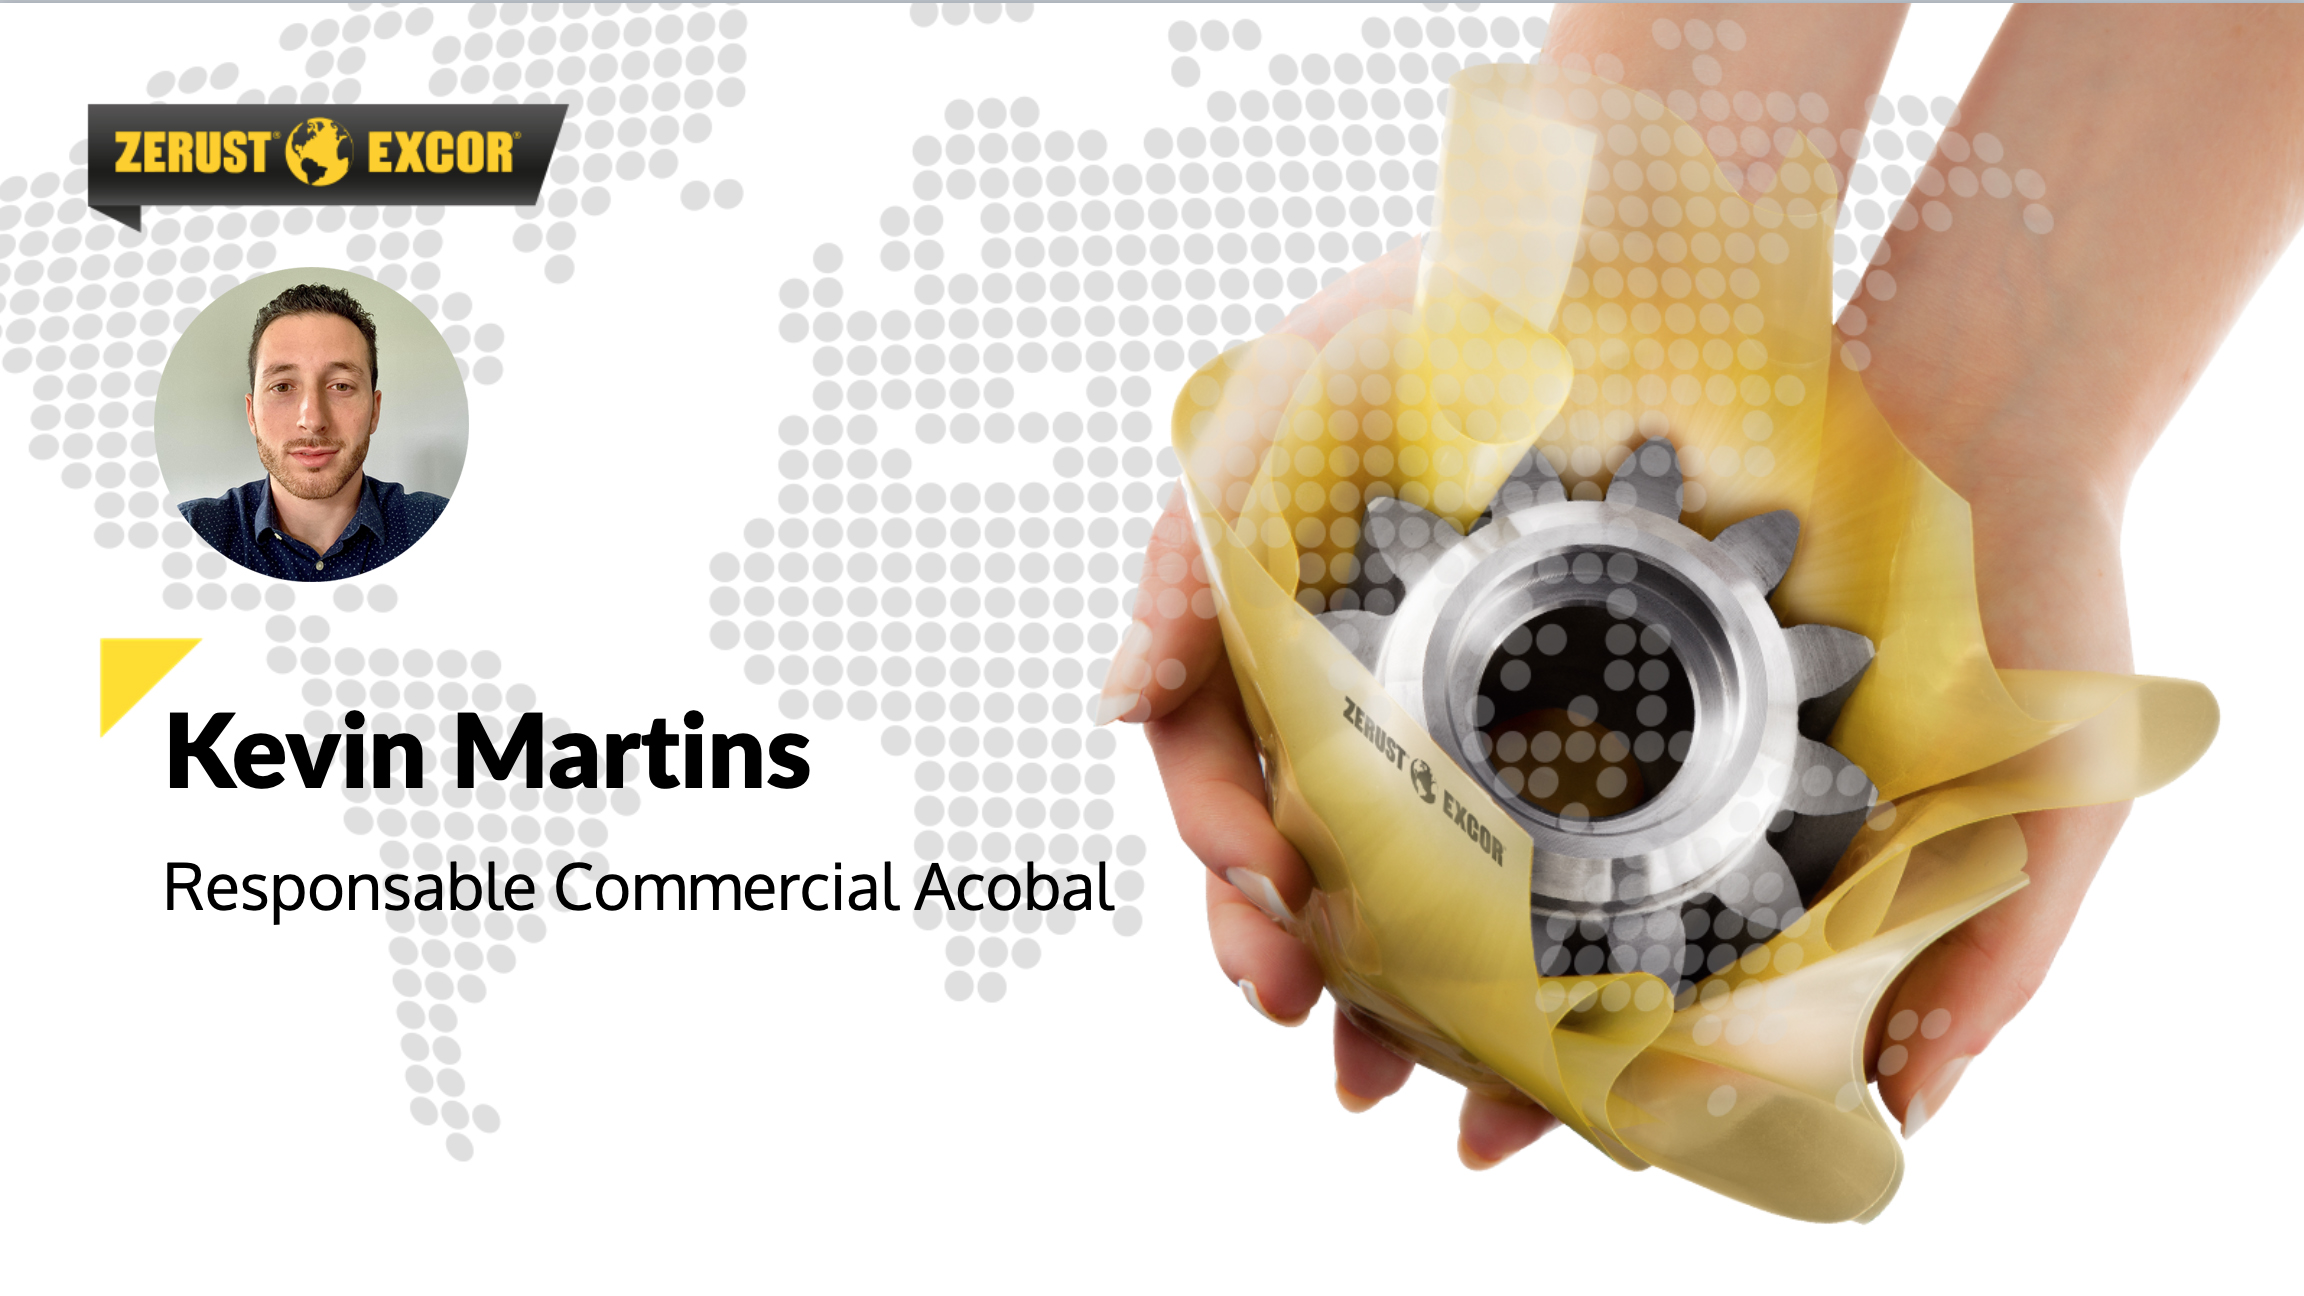 kevin martins expert corrosion carte mondiale zerust excor